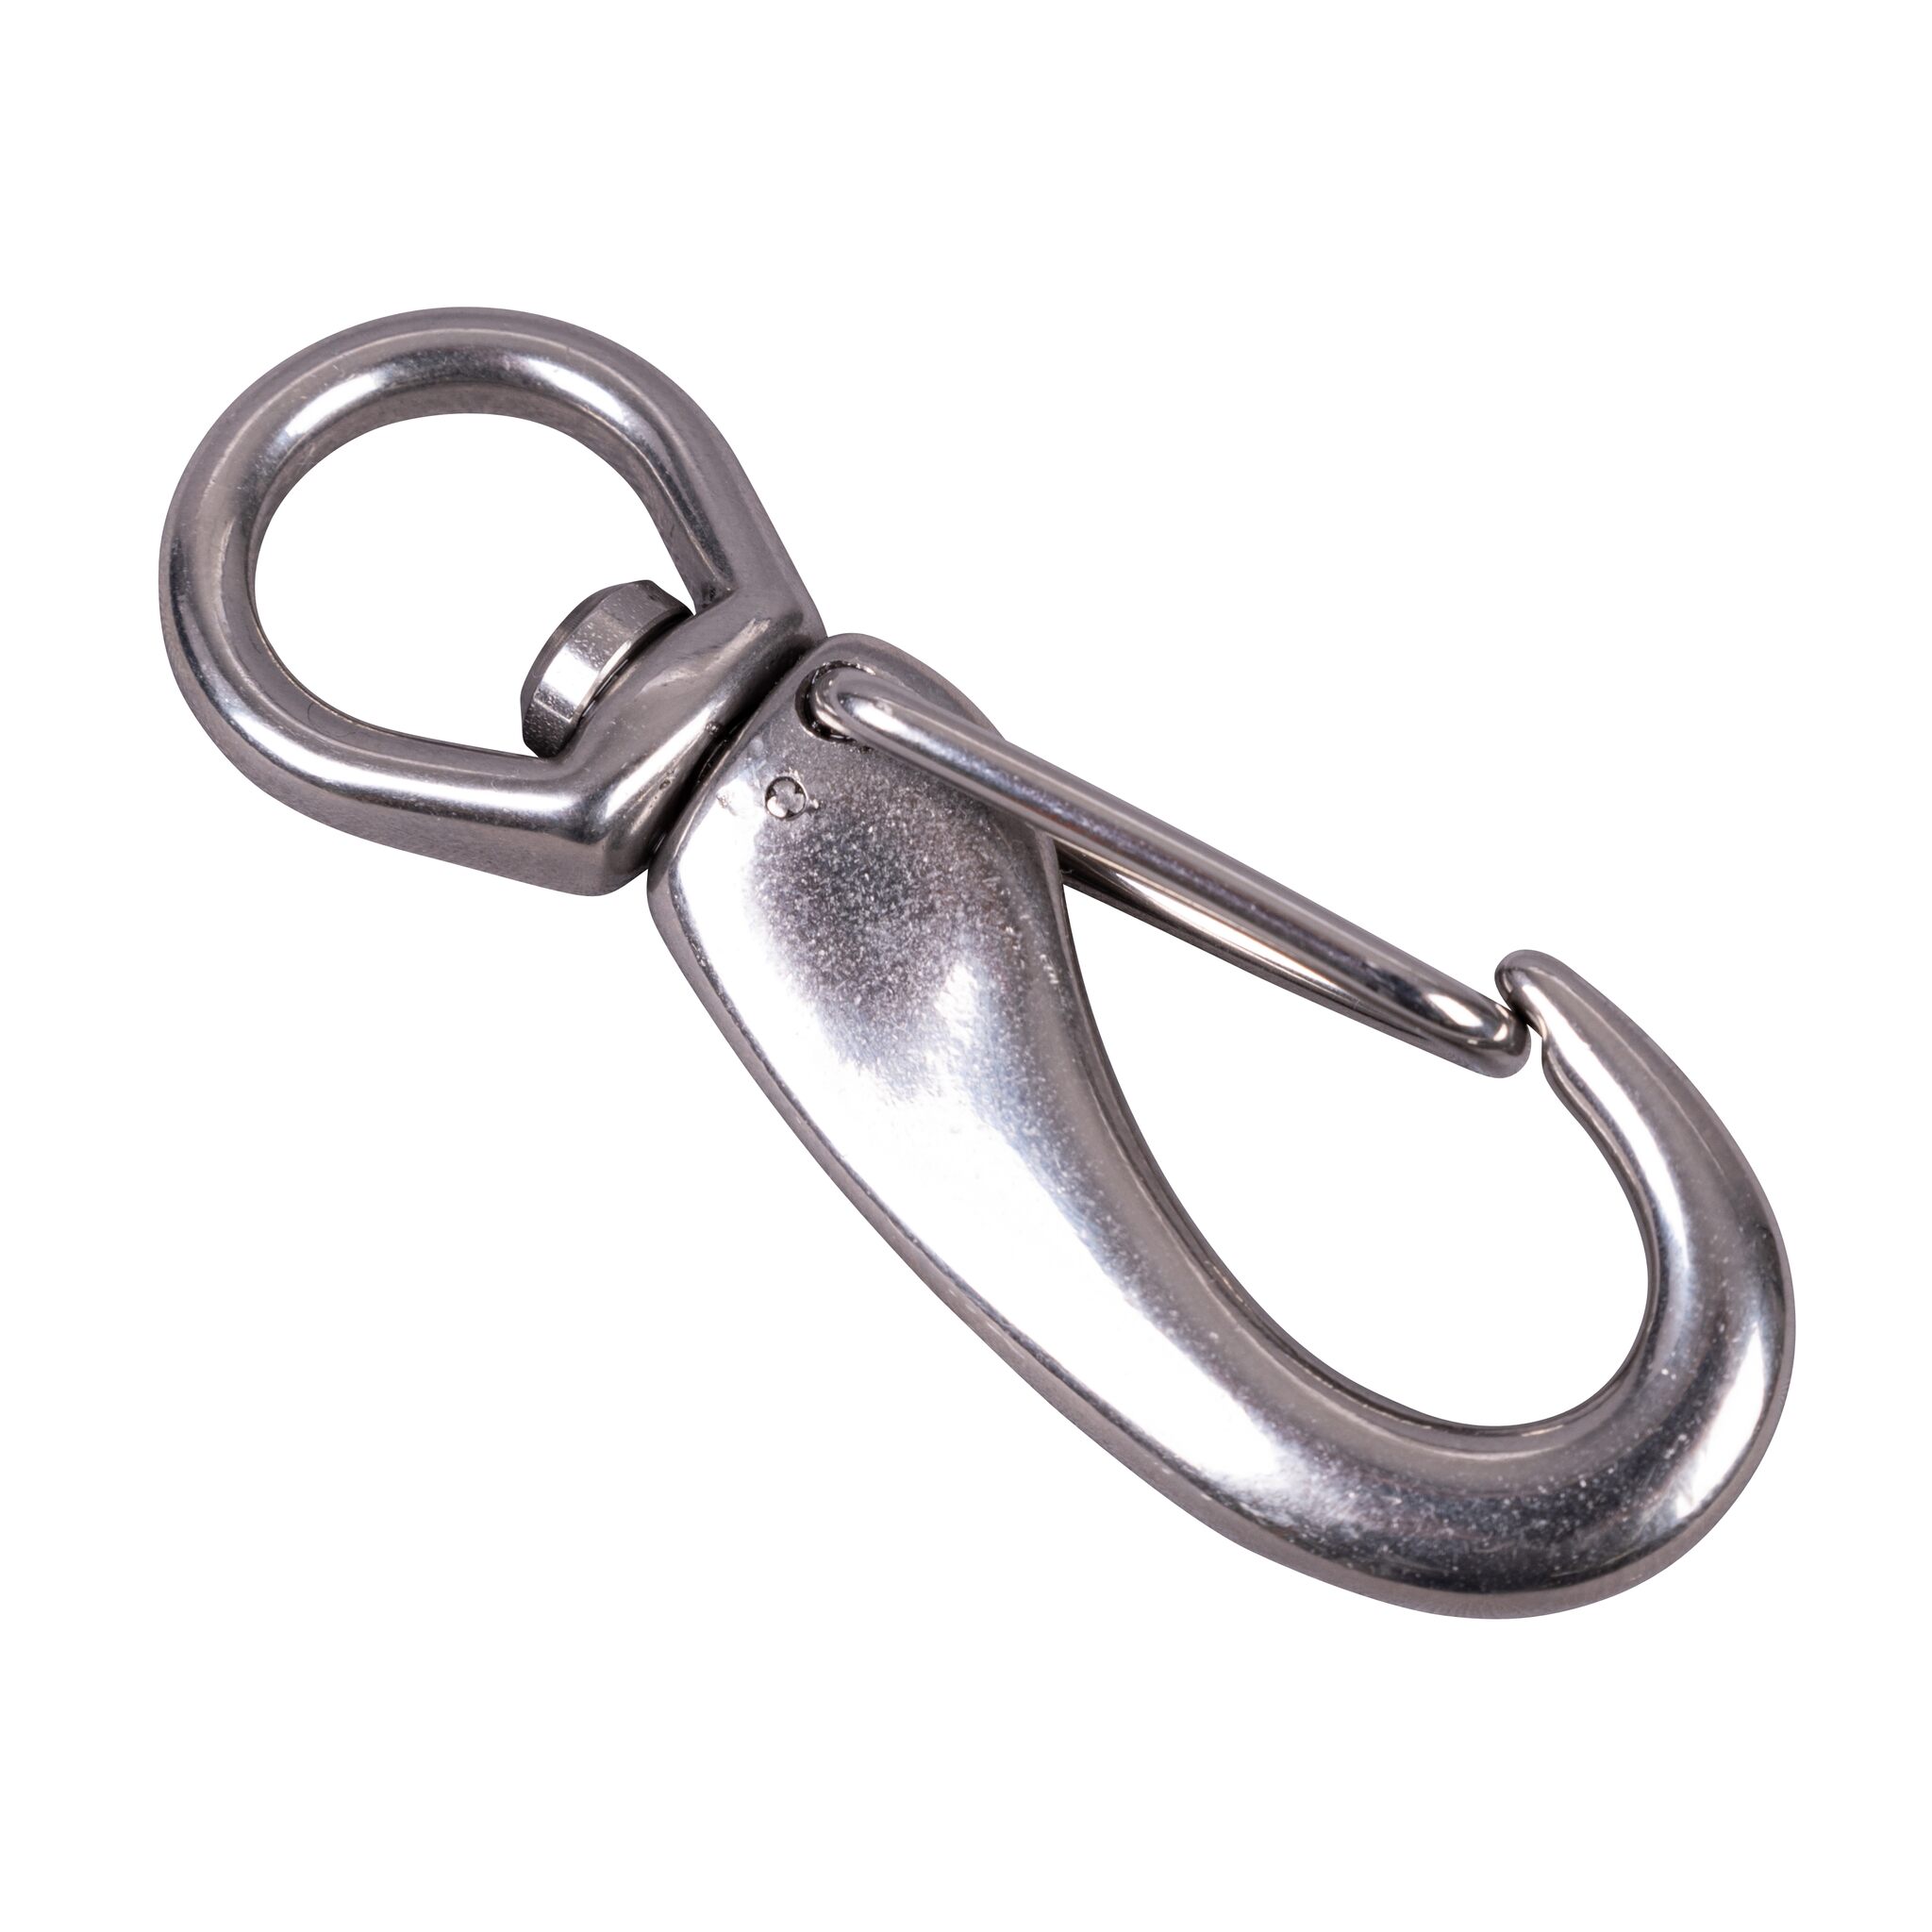 Snap hook with swivel